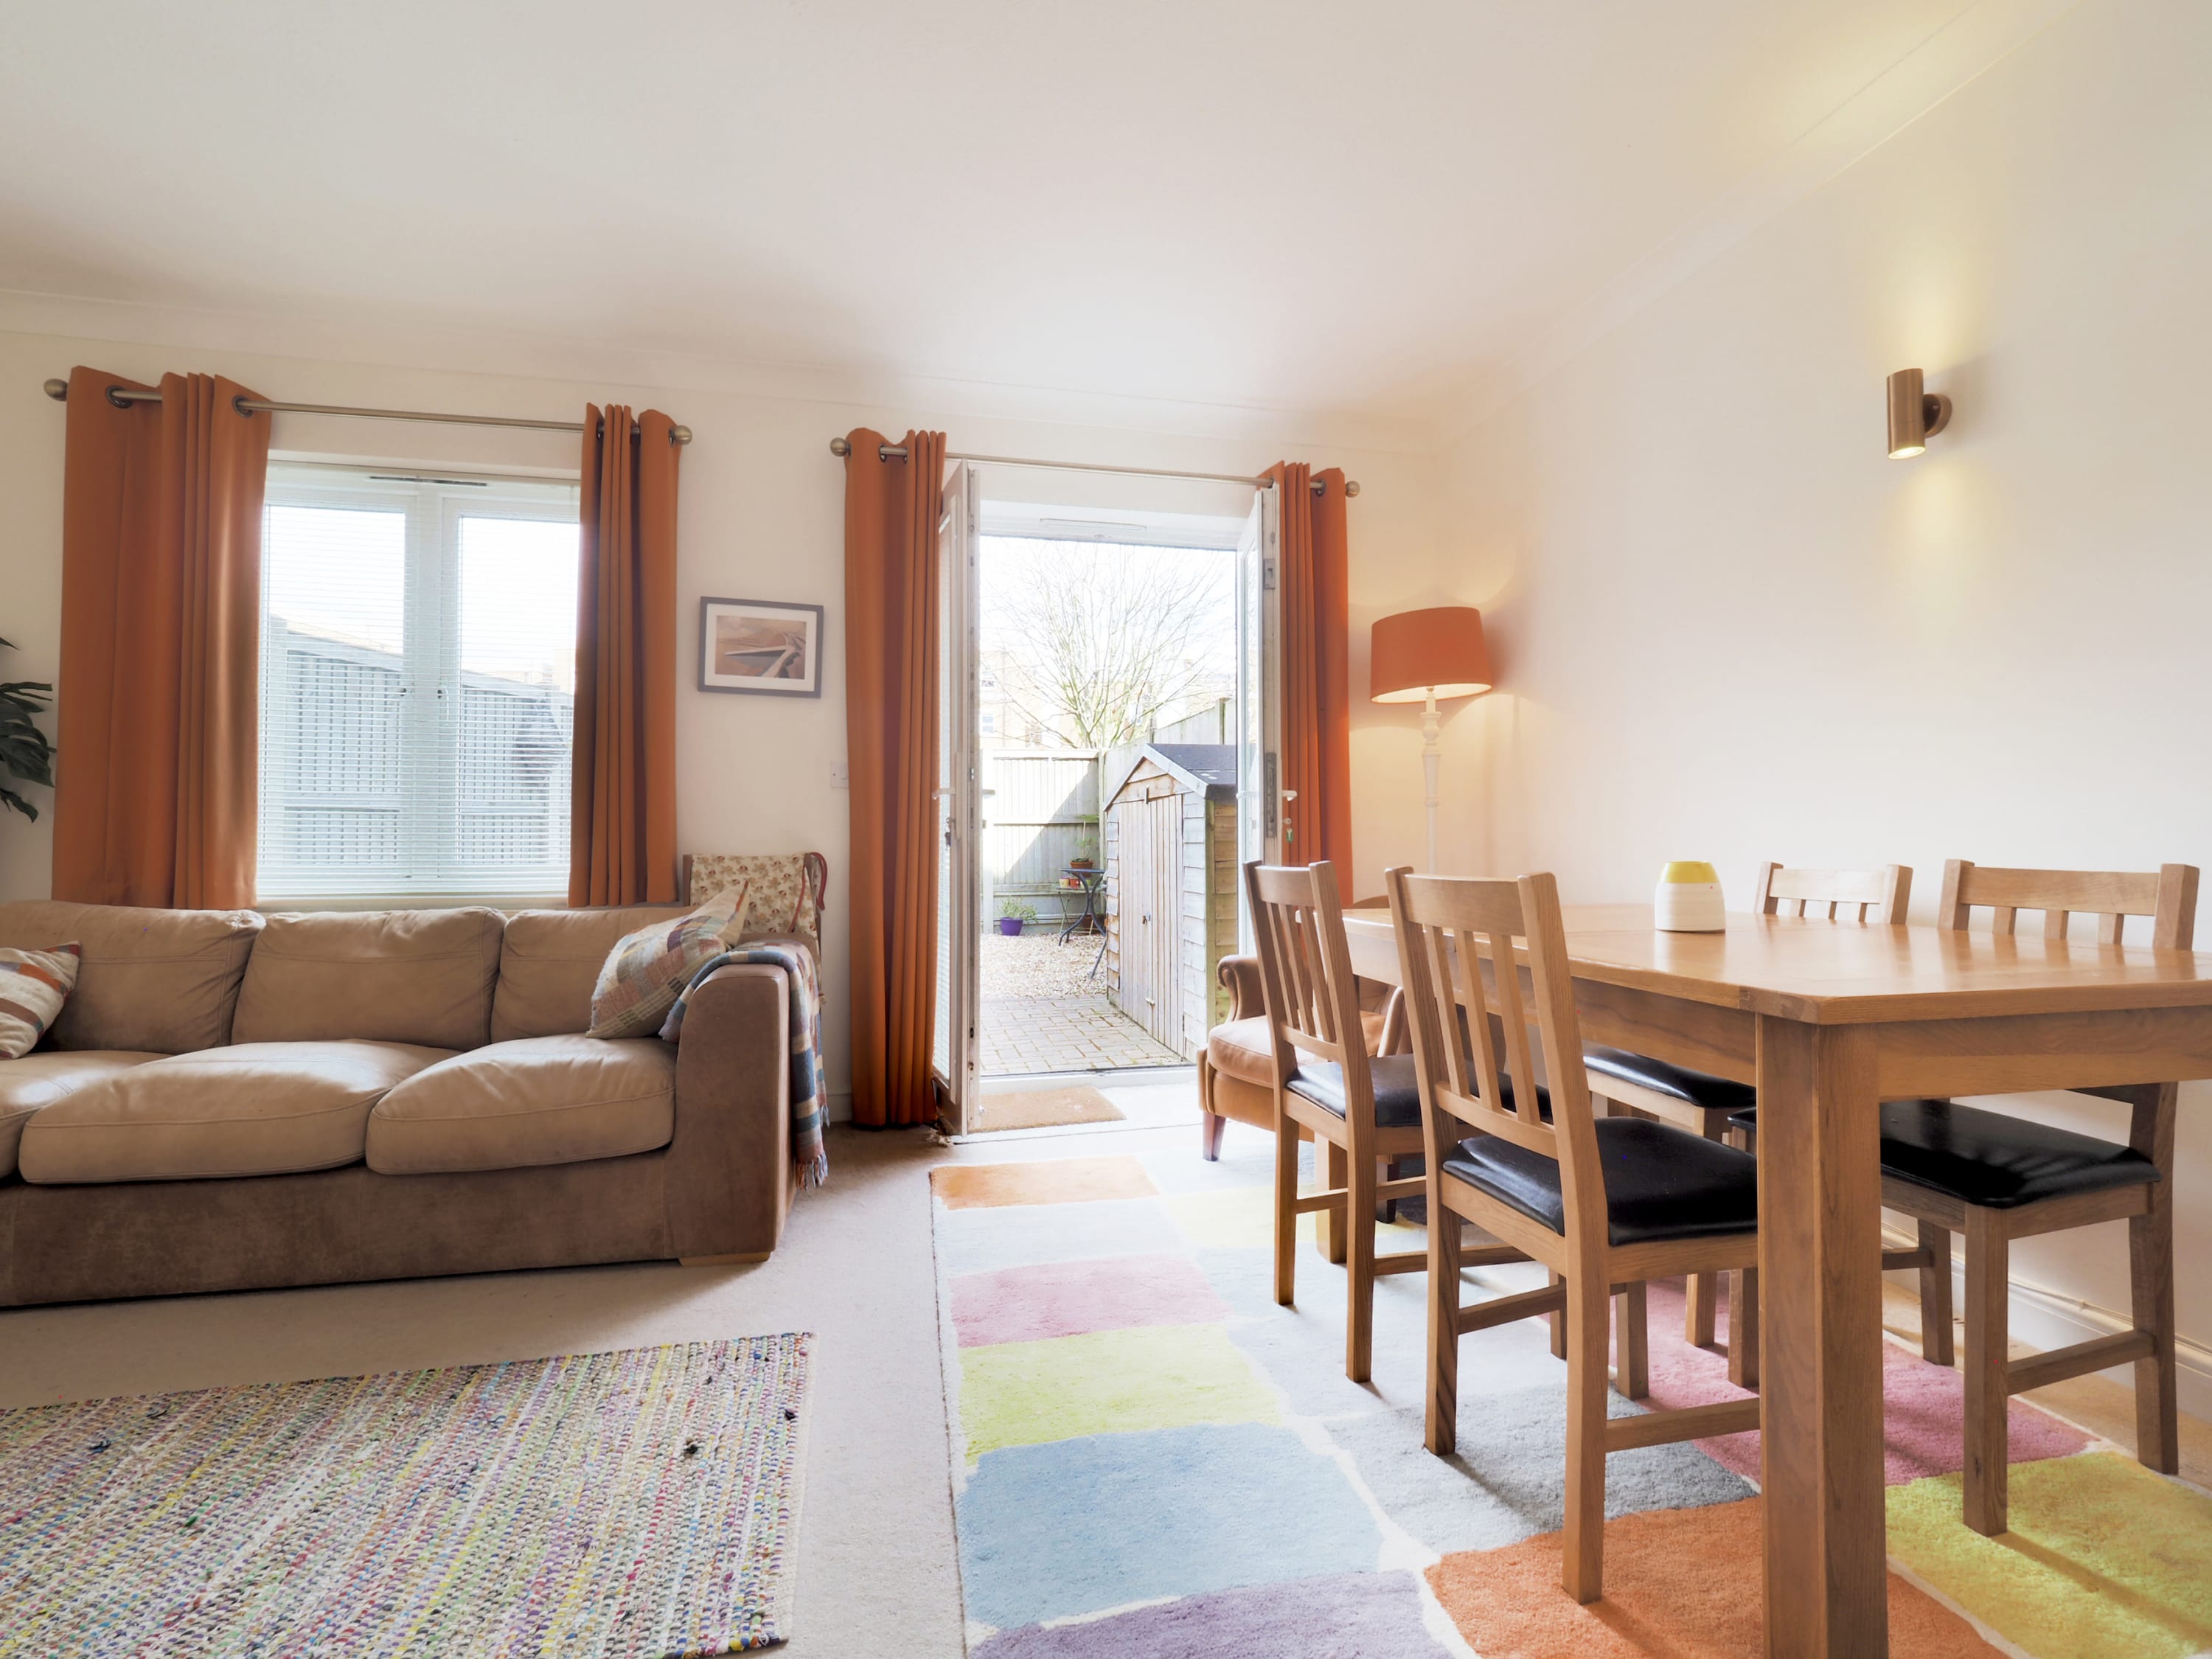 Property Image 2 - Sweyn House - Spacious 4 bedroom family home by the seaside